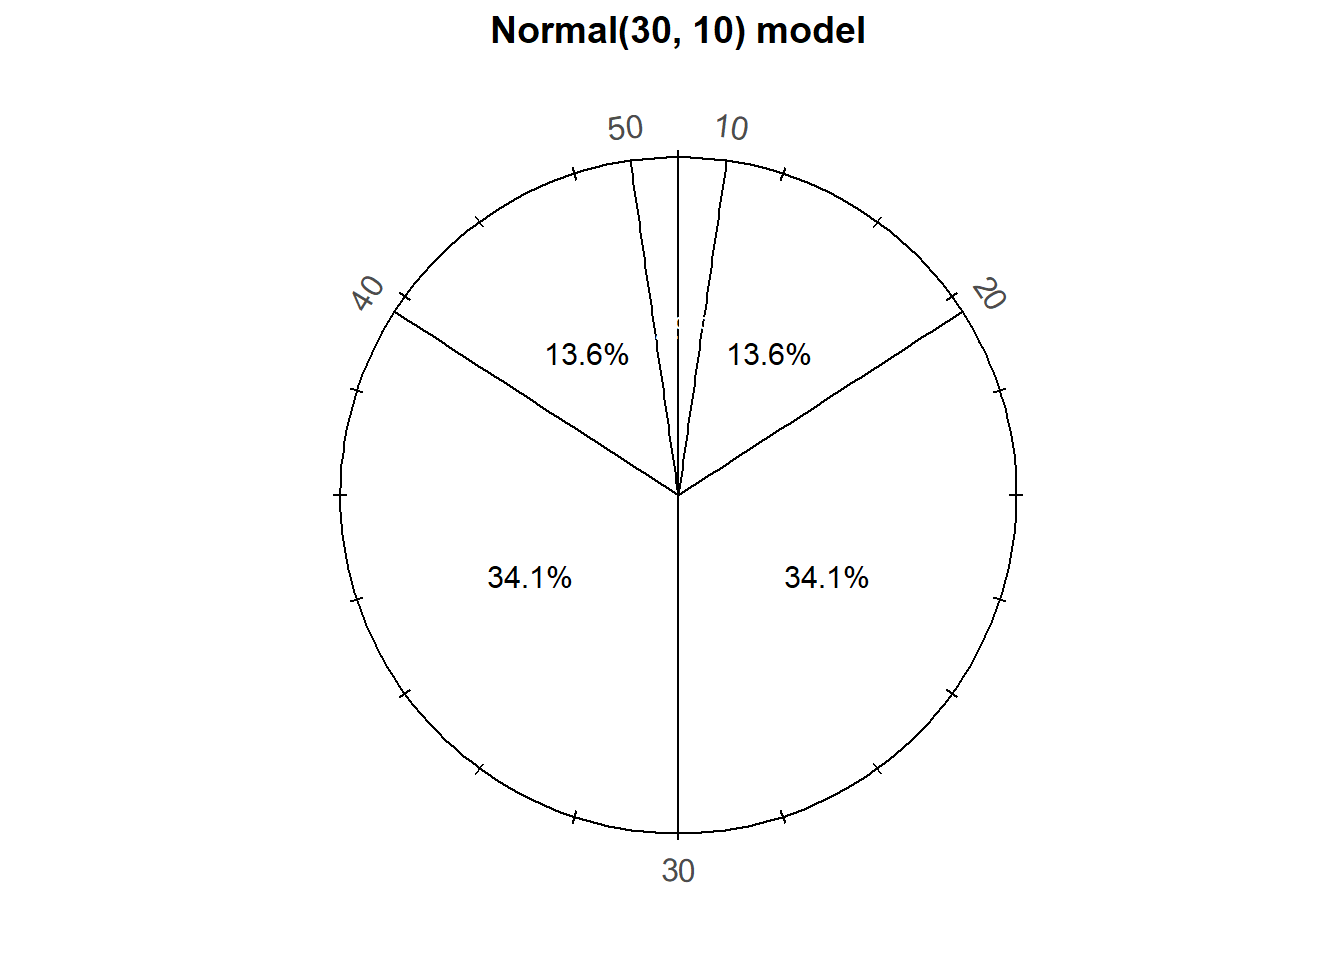 A continuous Normal(30, 10) spinner. The same spinner is displayed on both sides, with different features highlighted on the left and right. Only selected rounded values are displayed, but in the idealized model the spinner is infinitely precise so that any real number is a possible outcome. Notice that the values on the axis are not evenly spaced.